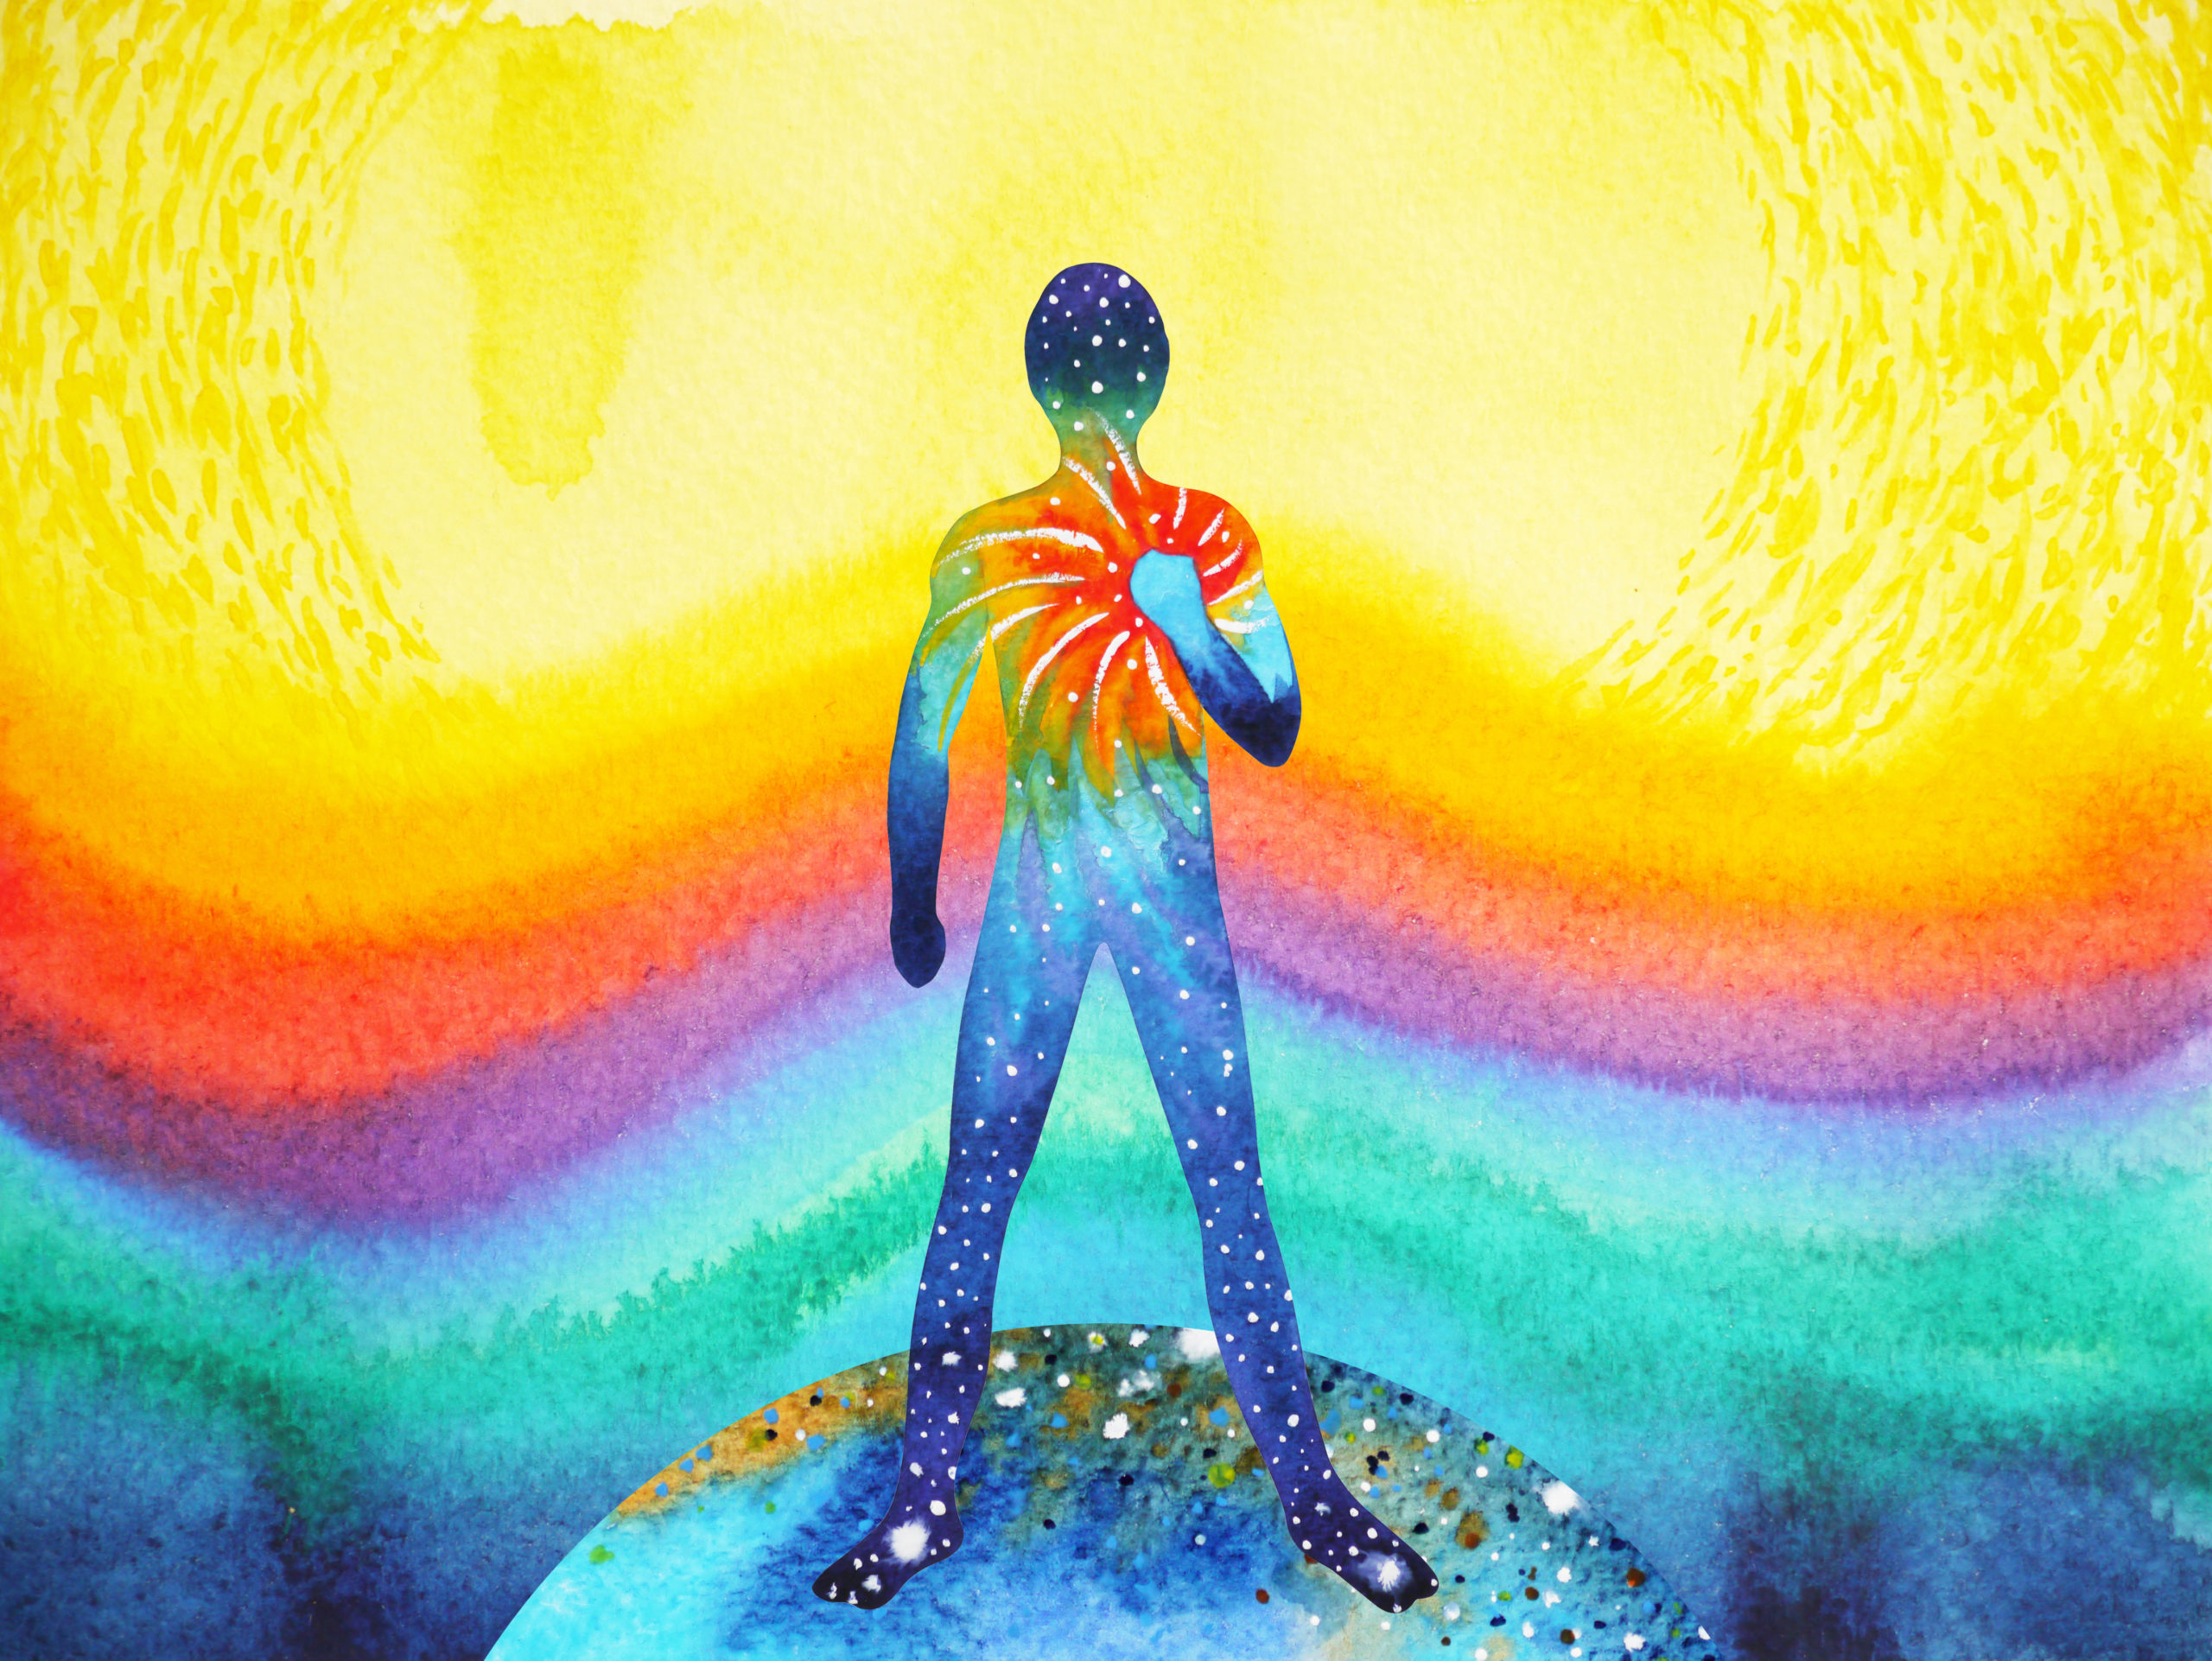 Reiki: What is it? And how can it help me?